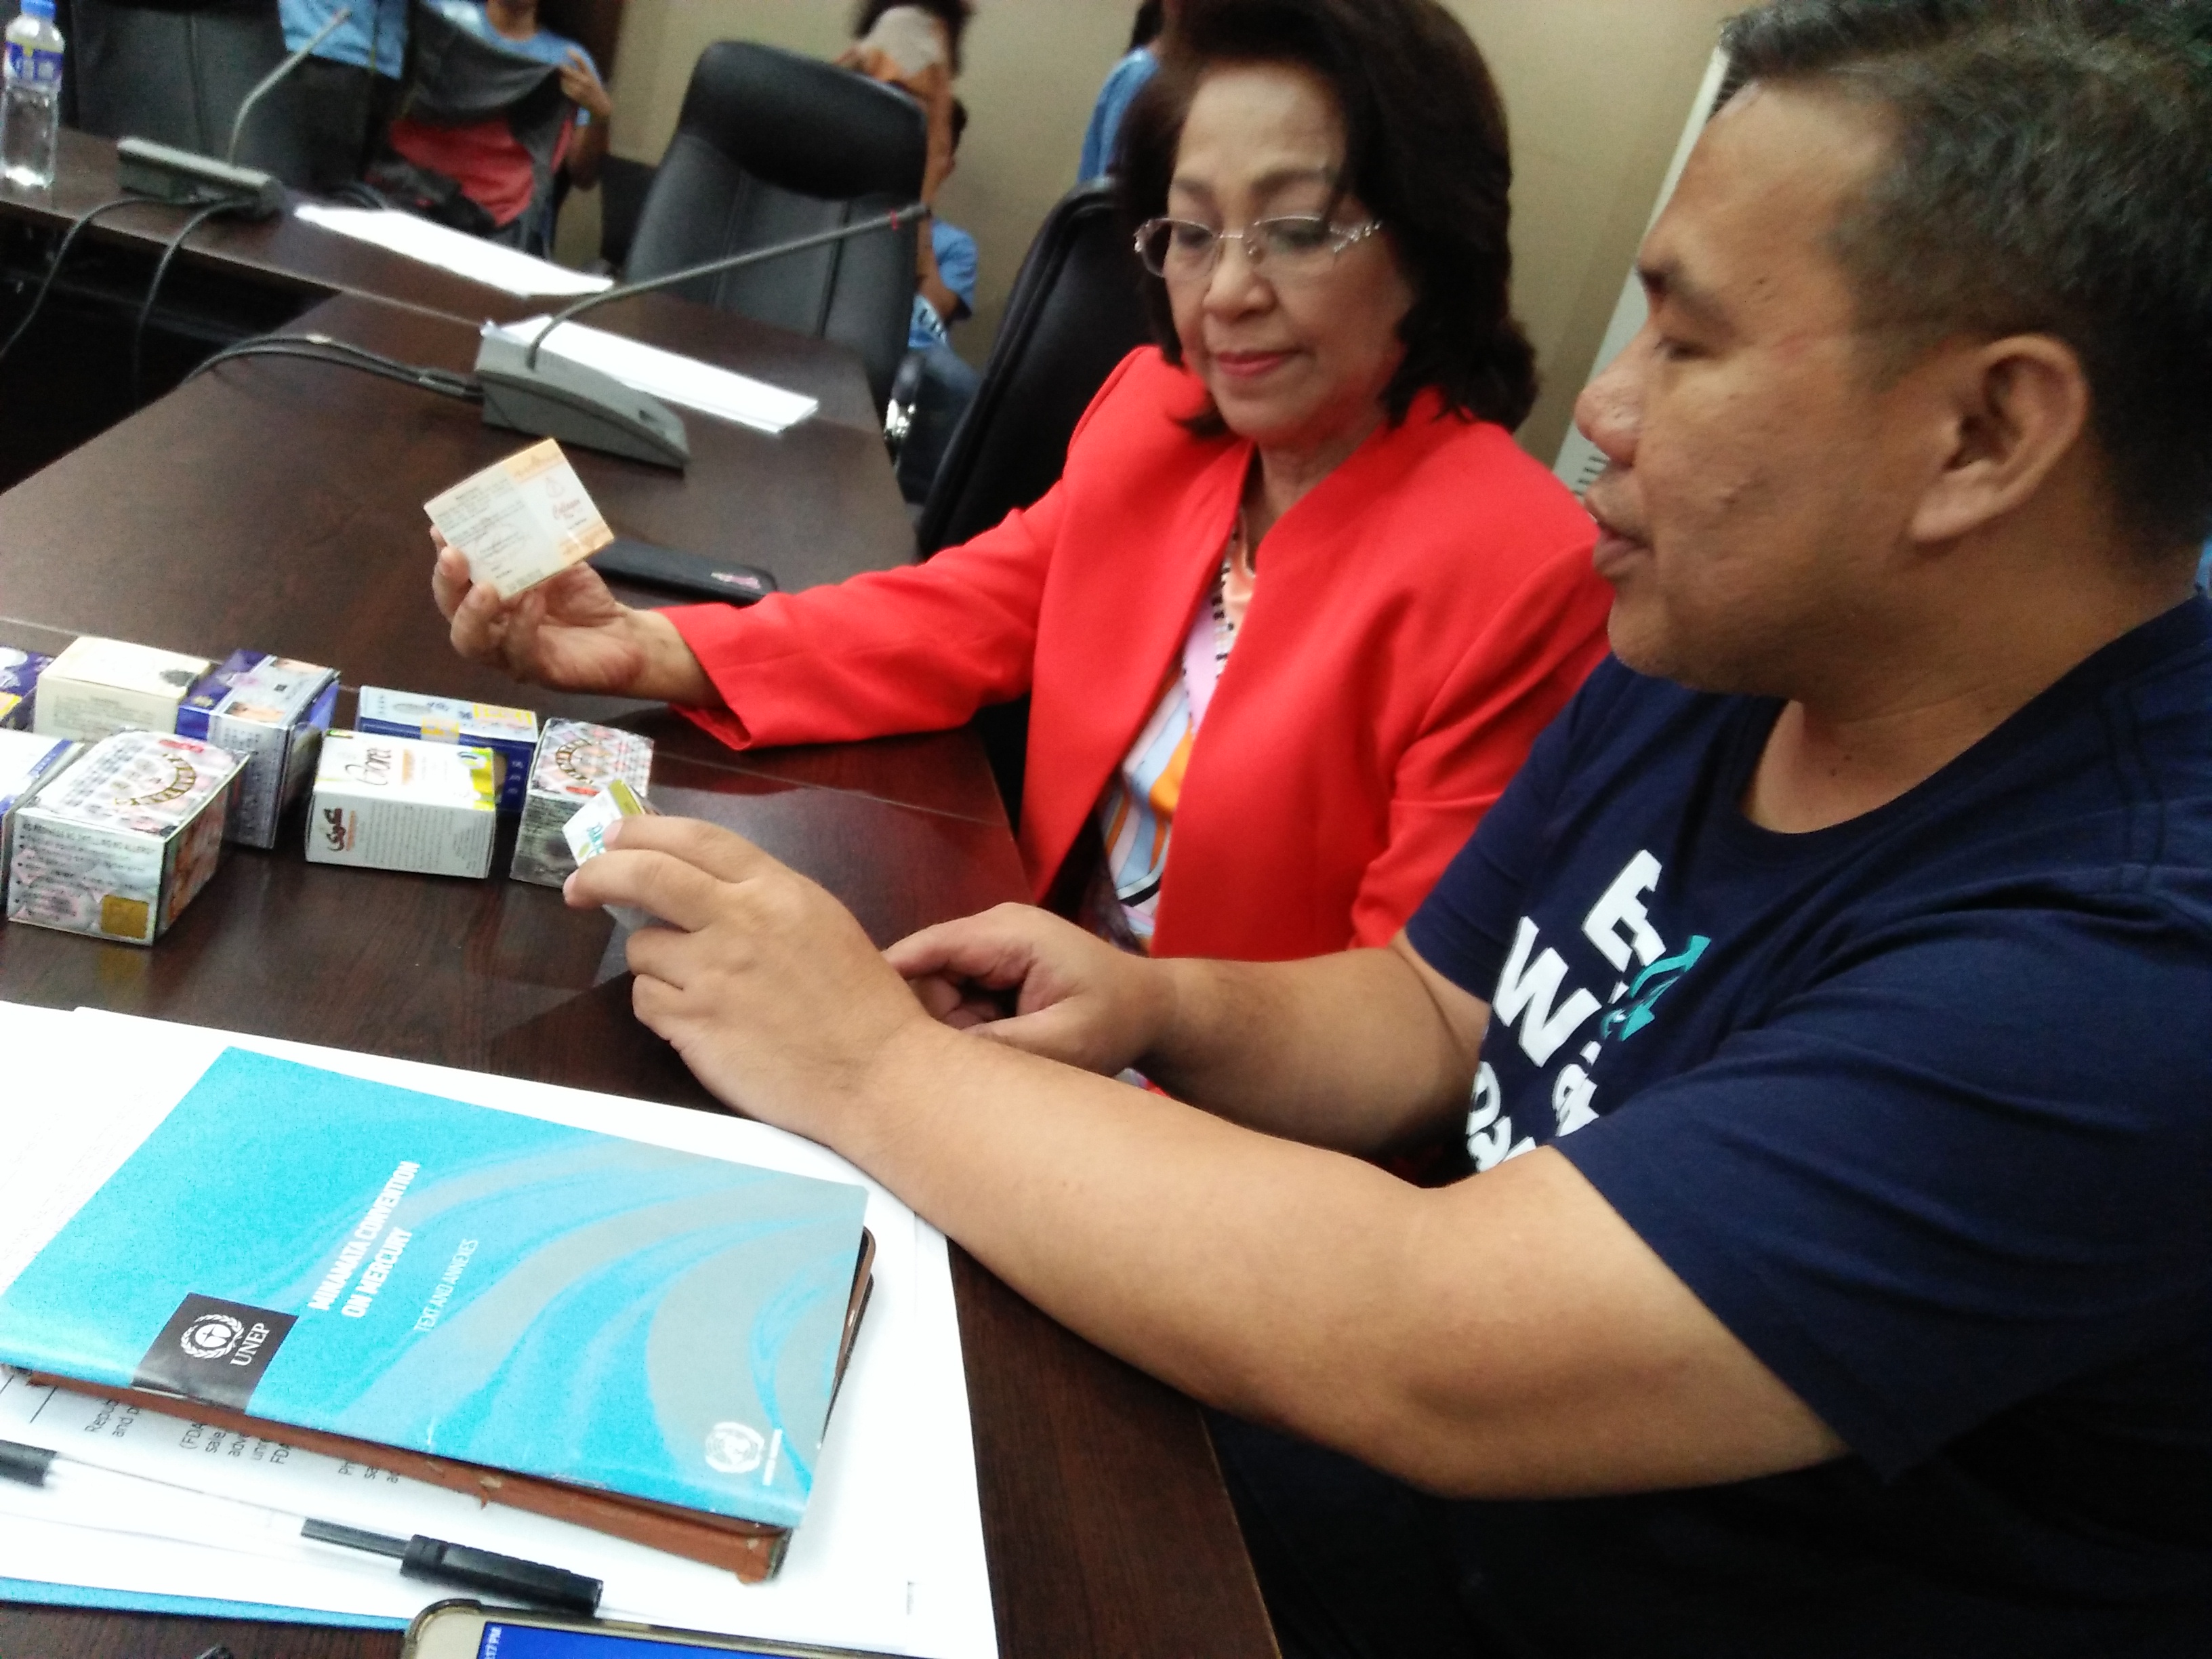 EcoWaste Coalition's Chemical Safety Campaigner Thony Dizon show Councilor Elizabeth Delarmente samples of dangerous skin lightening products containing mercury, a toxic chemical that is not allowed in cosmetic product formulations under the ASEAN Cosmetic Directive.  The Minamata Convention on Mercury (the blue book at the foreground) has set a phase-out by 2020 of skin lightening creams and soaps with mercury above 1 ppm. 